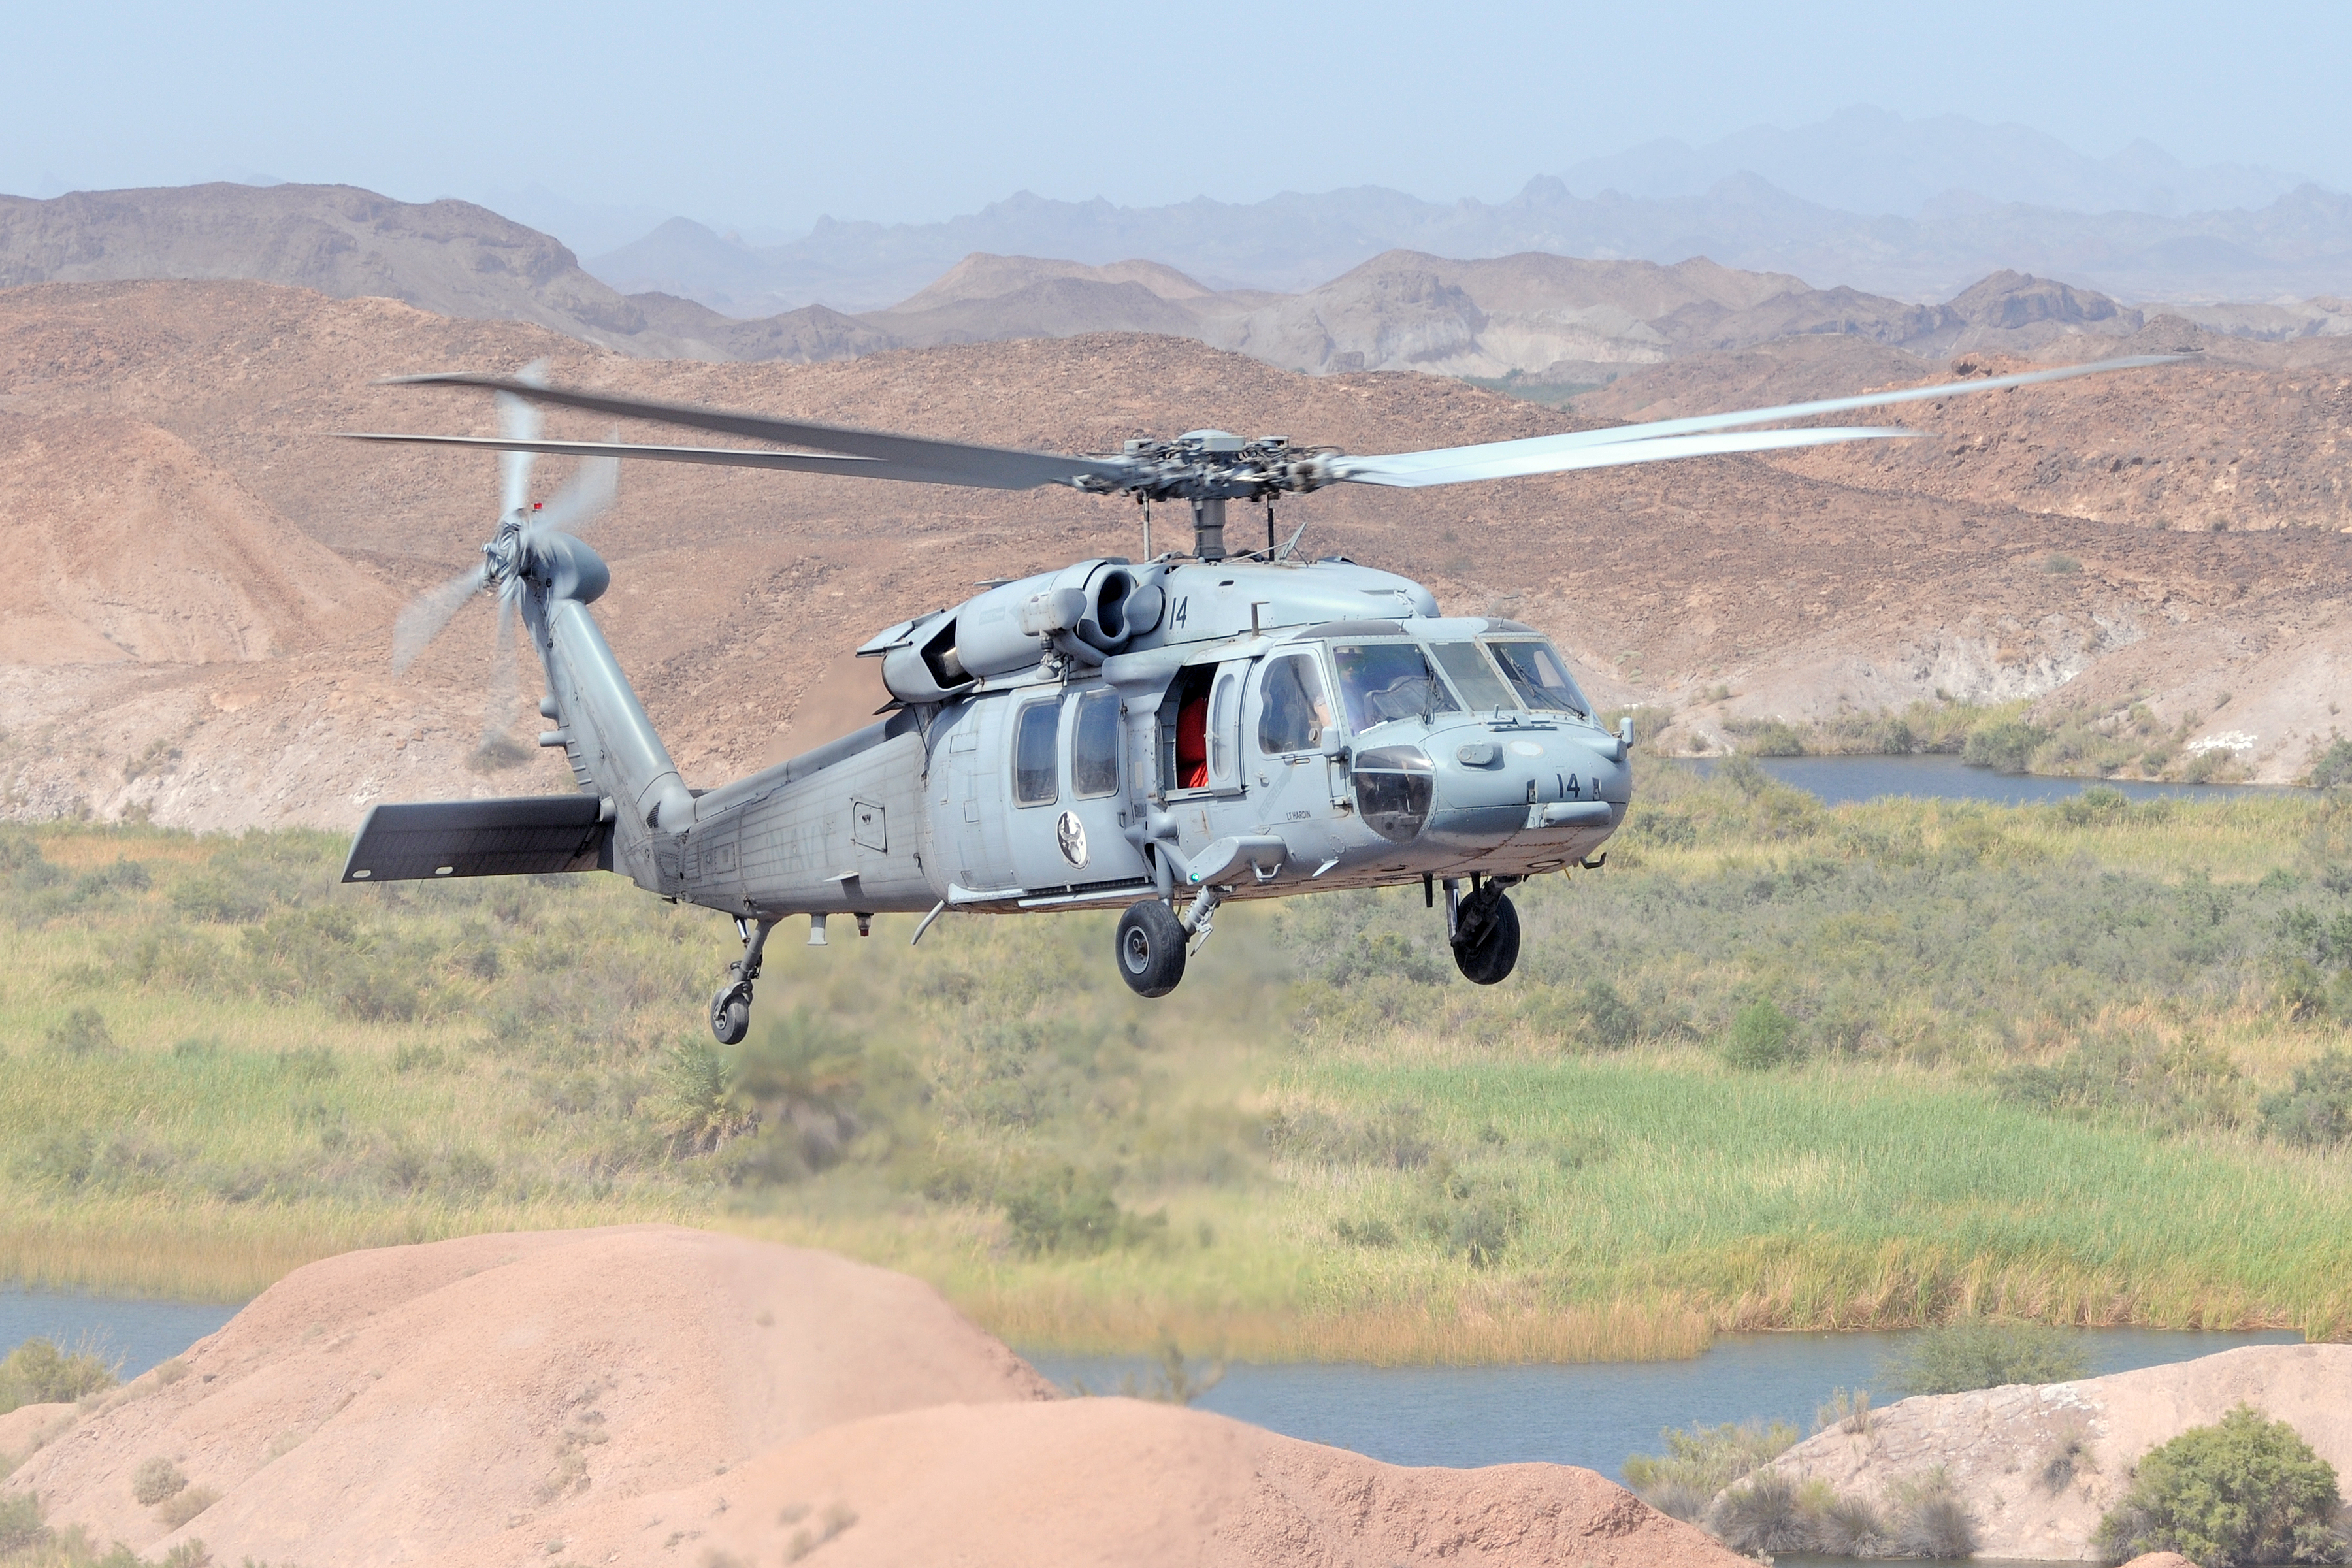 MH-60 Sierra Helicopters - Naval Helicopter Association 